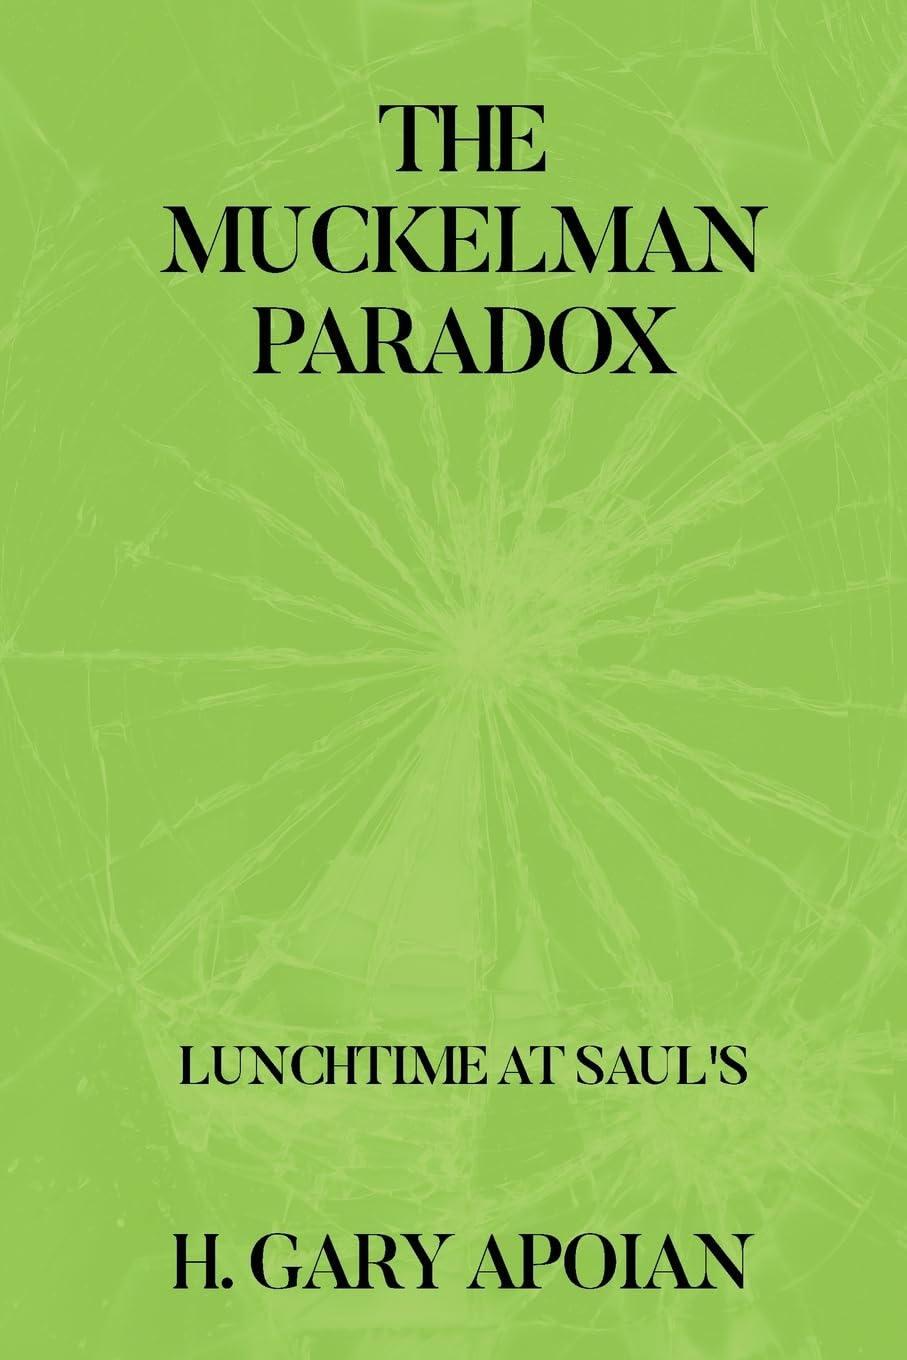 Introducing "The Muckelman Paradox: Lunchtime at Saul's" - A Humorous and Captivating Tale by H. Gary Apoian